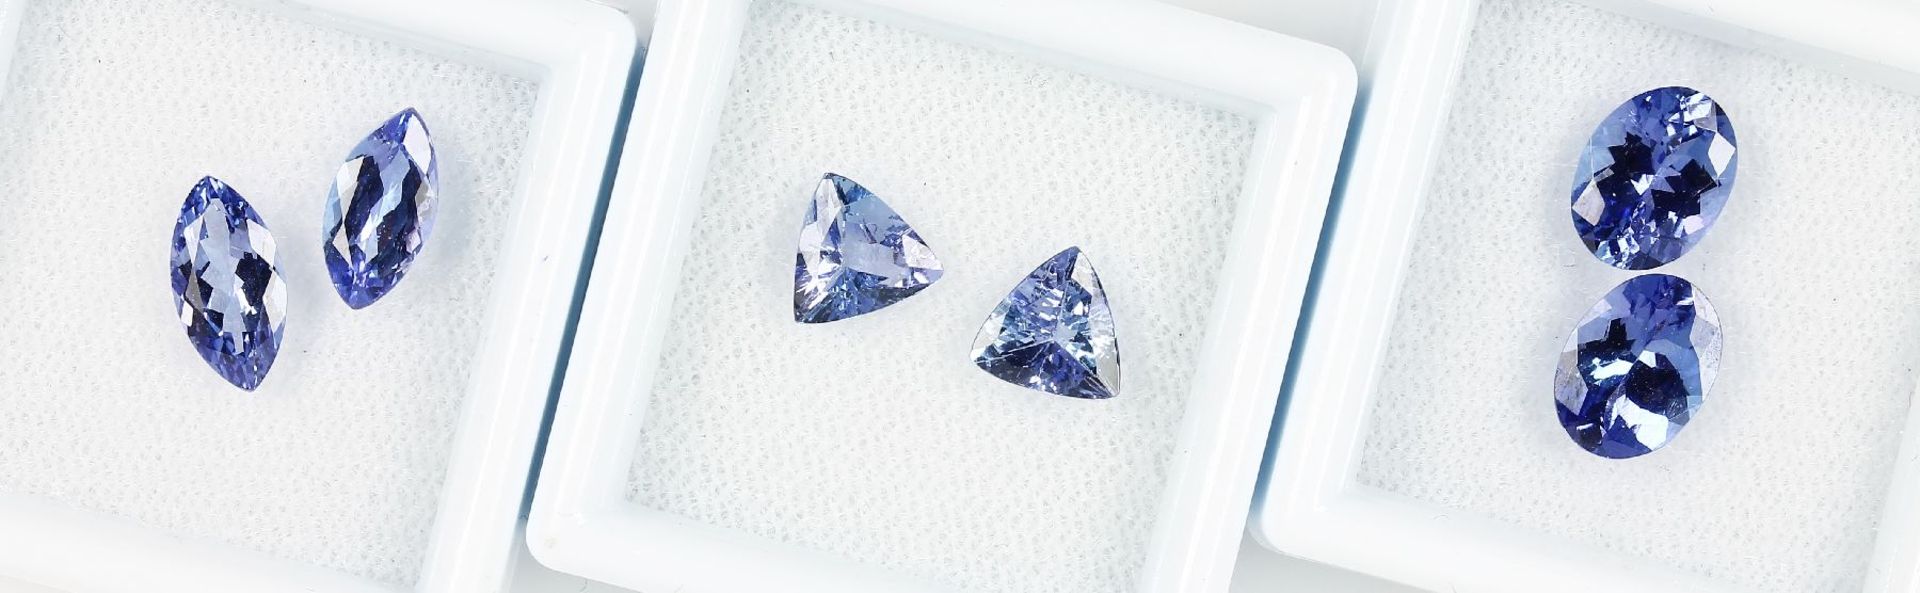 Lot 3 bevelled tanzanite-pairs : 1 x triangle total approx. 1.64 ct; 1 x oval totalapprox. 3.11